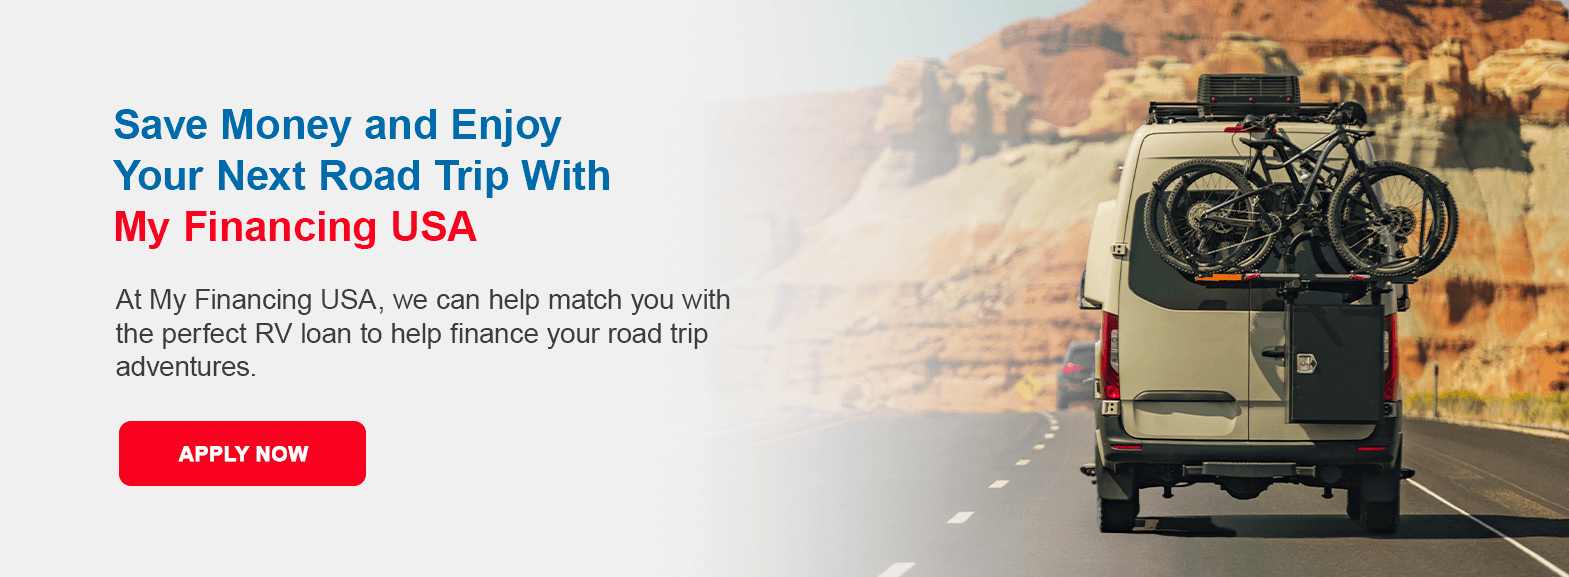 Save Money and Enjoy Your Next Road Trip With My Financing USA. At My Financing USA, we can help match you with the perfect RV loan to help finance your road trip adventures. Apply now!